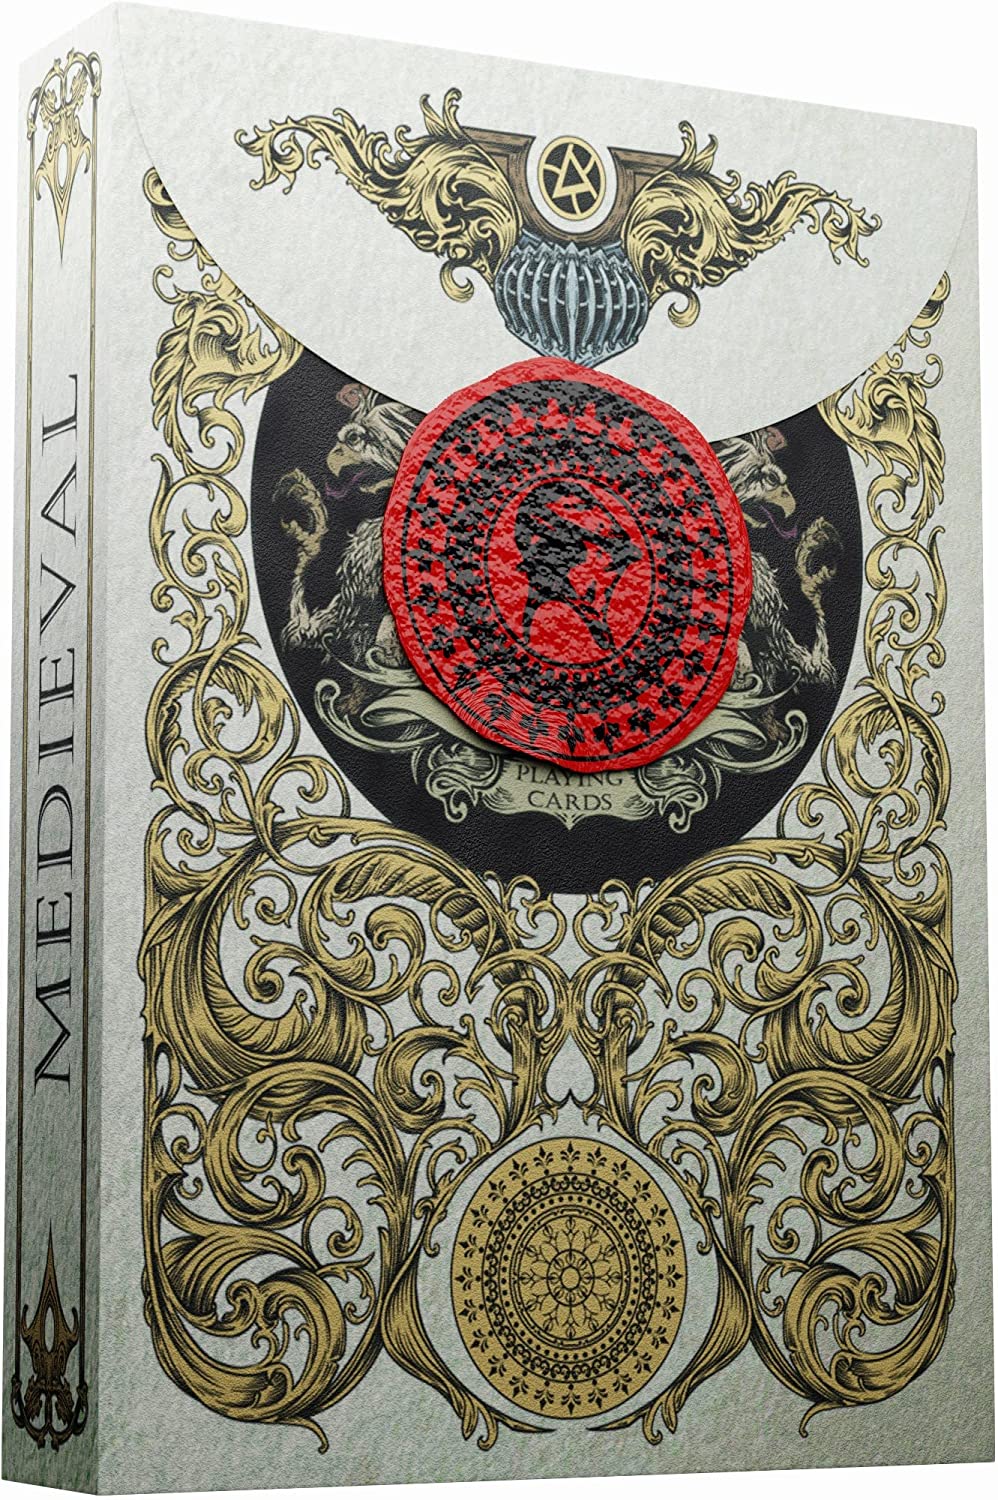 Unique Illustrated Designs for Kids & Adults Black Deck of Playing Cards Medieval Playing Cards with Unique Seal and Free Card Game eBook Playing Card Decks Stand Out with Cool Poker Cards 